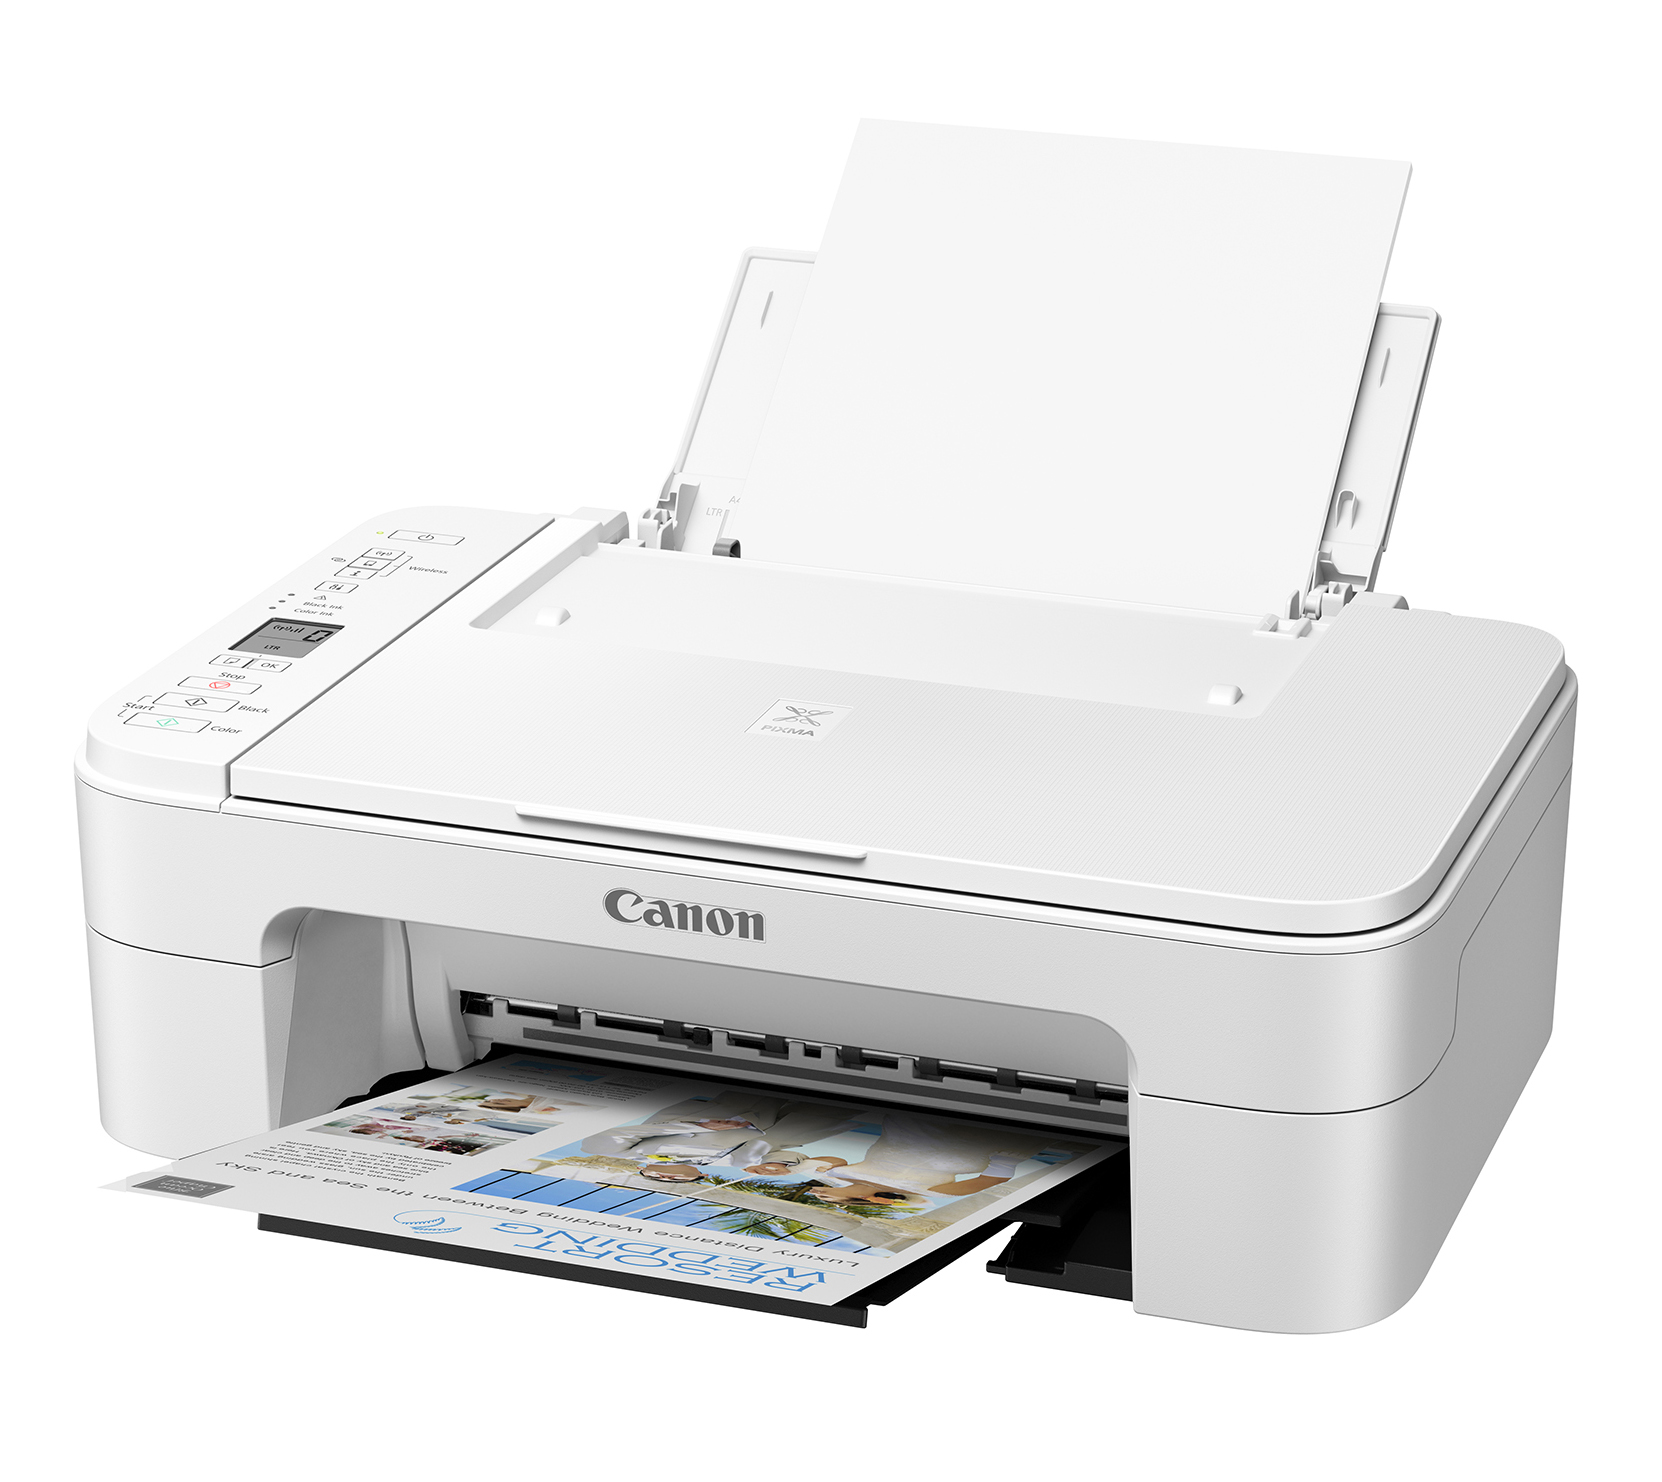 Canon TS3322 Wireless All In One Printer - image 3 of 4